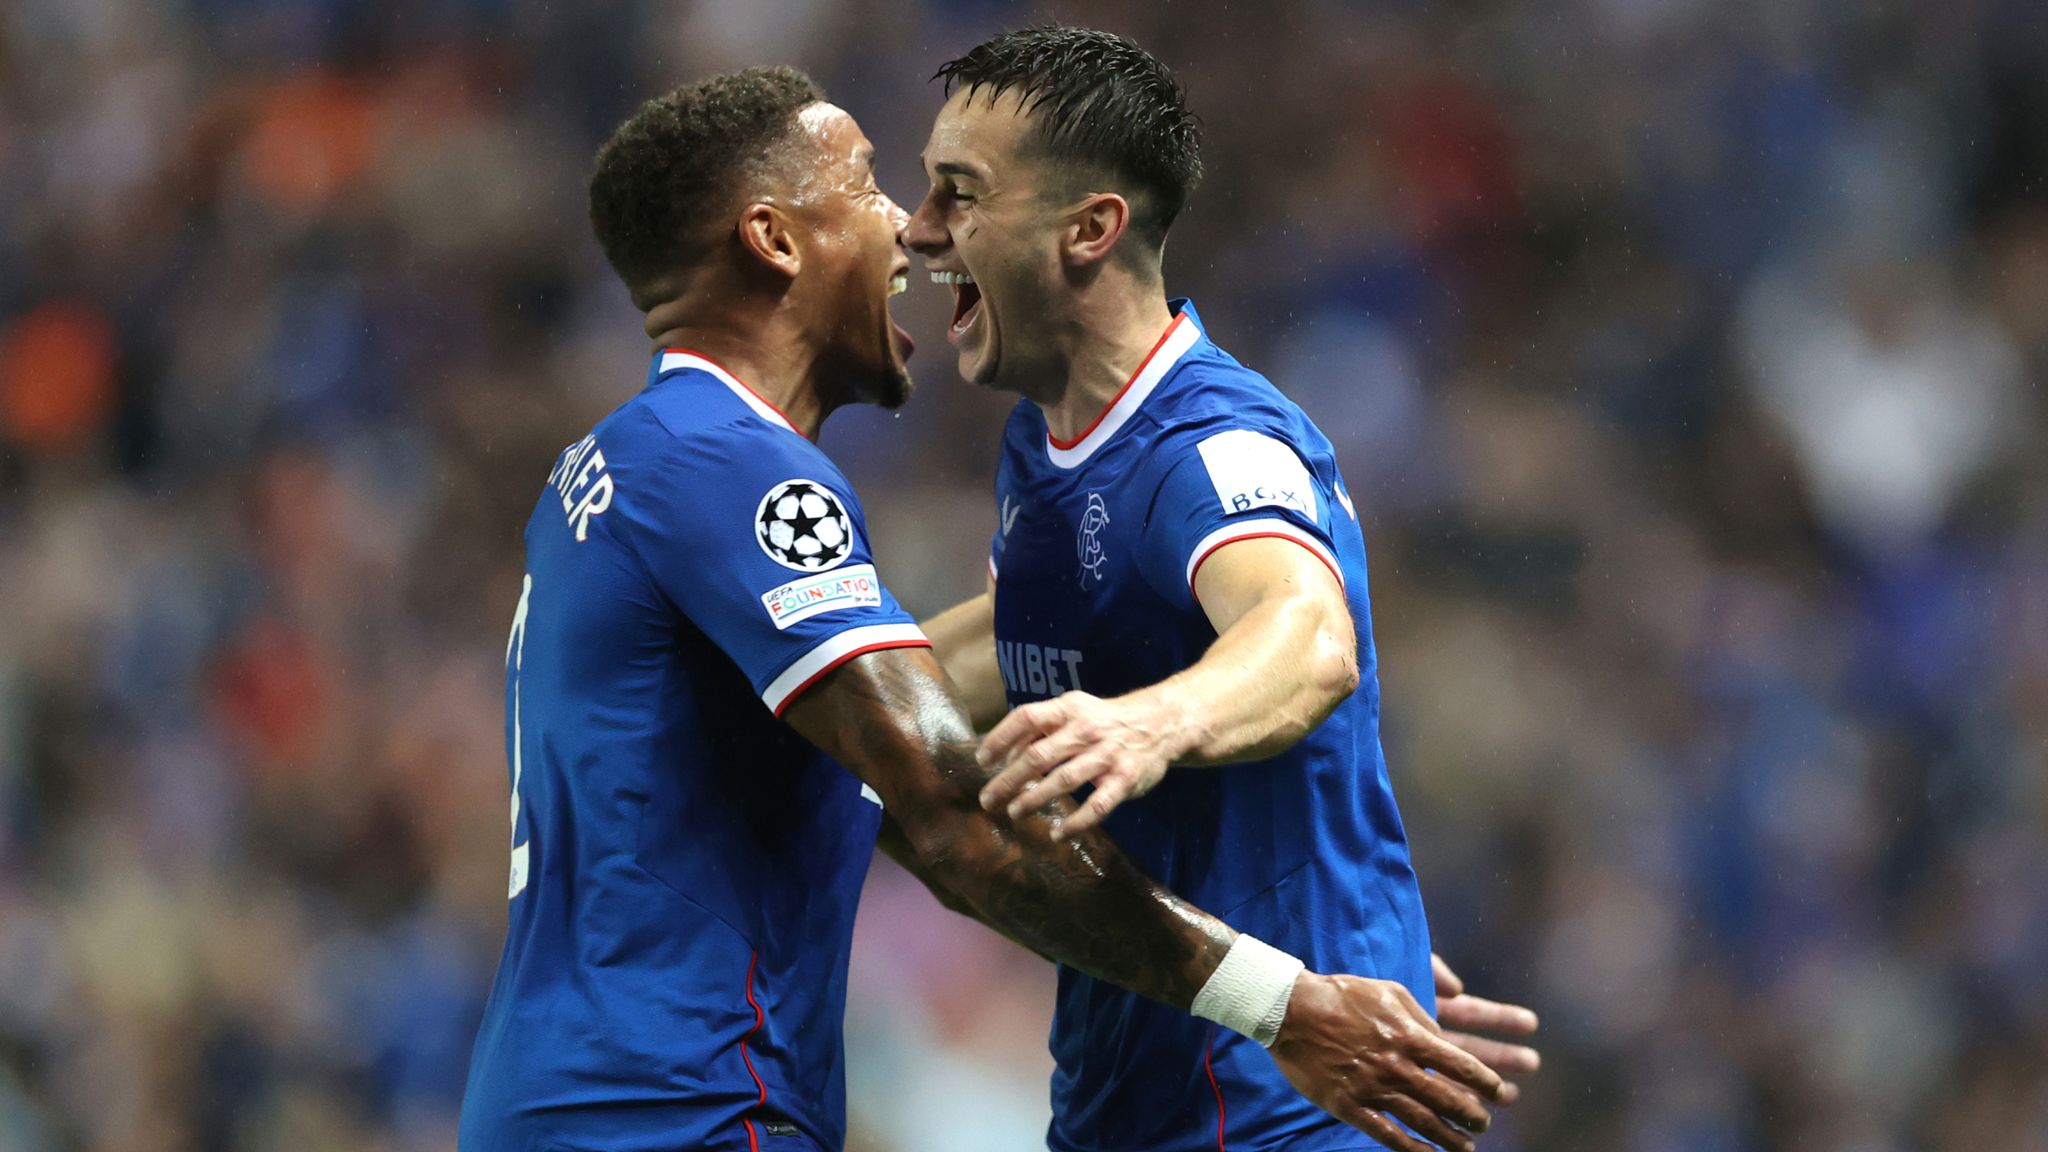 Rangers 2-2 PSV Eindhoven Champions League progress in the balance after Armando Obispos late intervention Football News Sky Sports